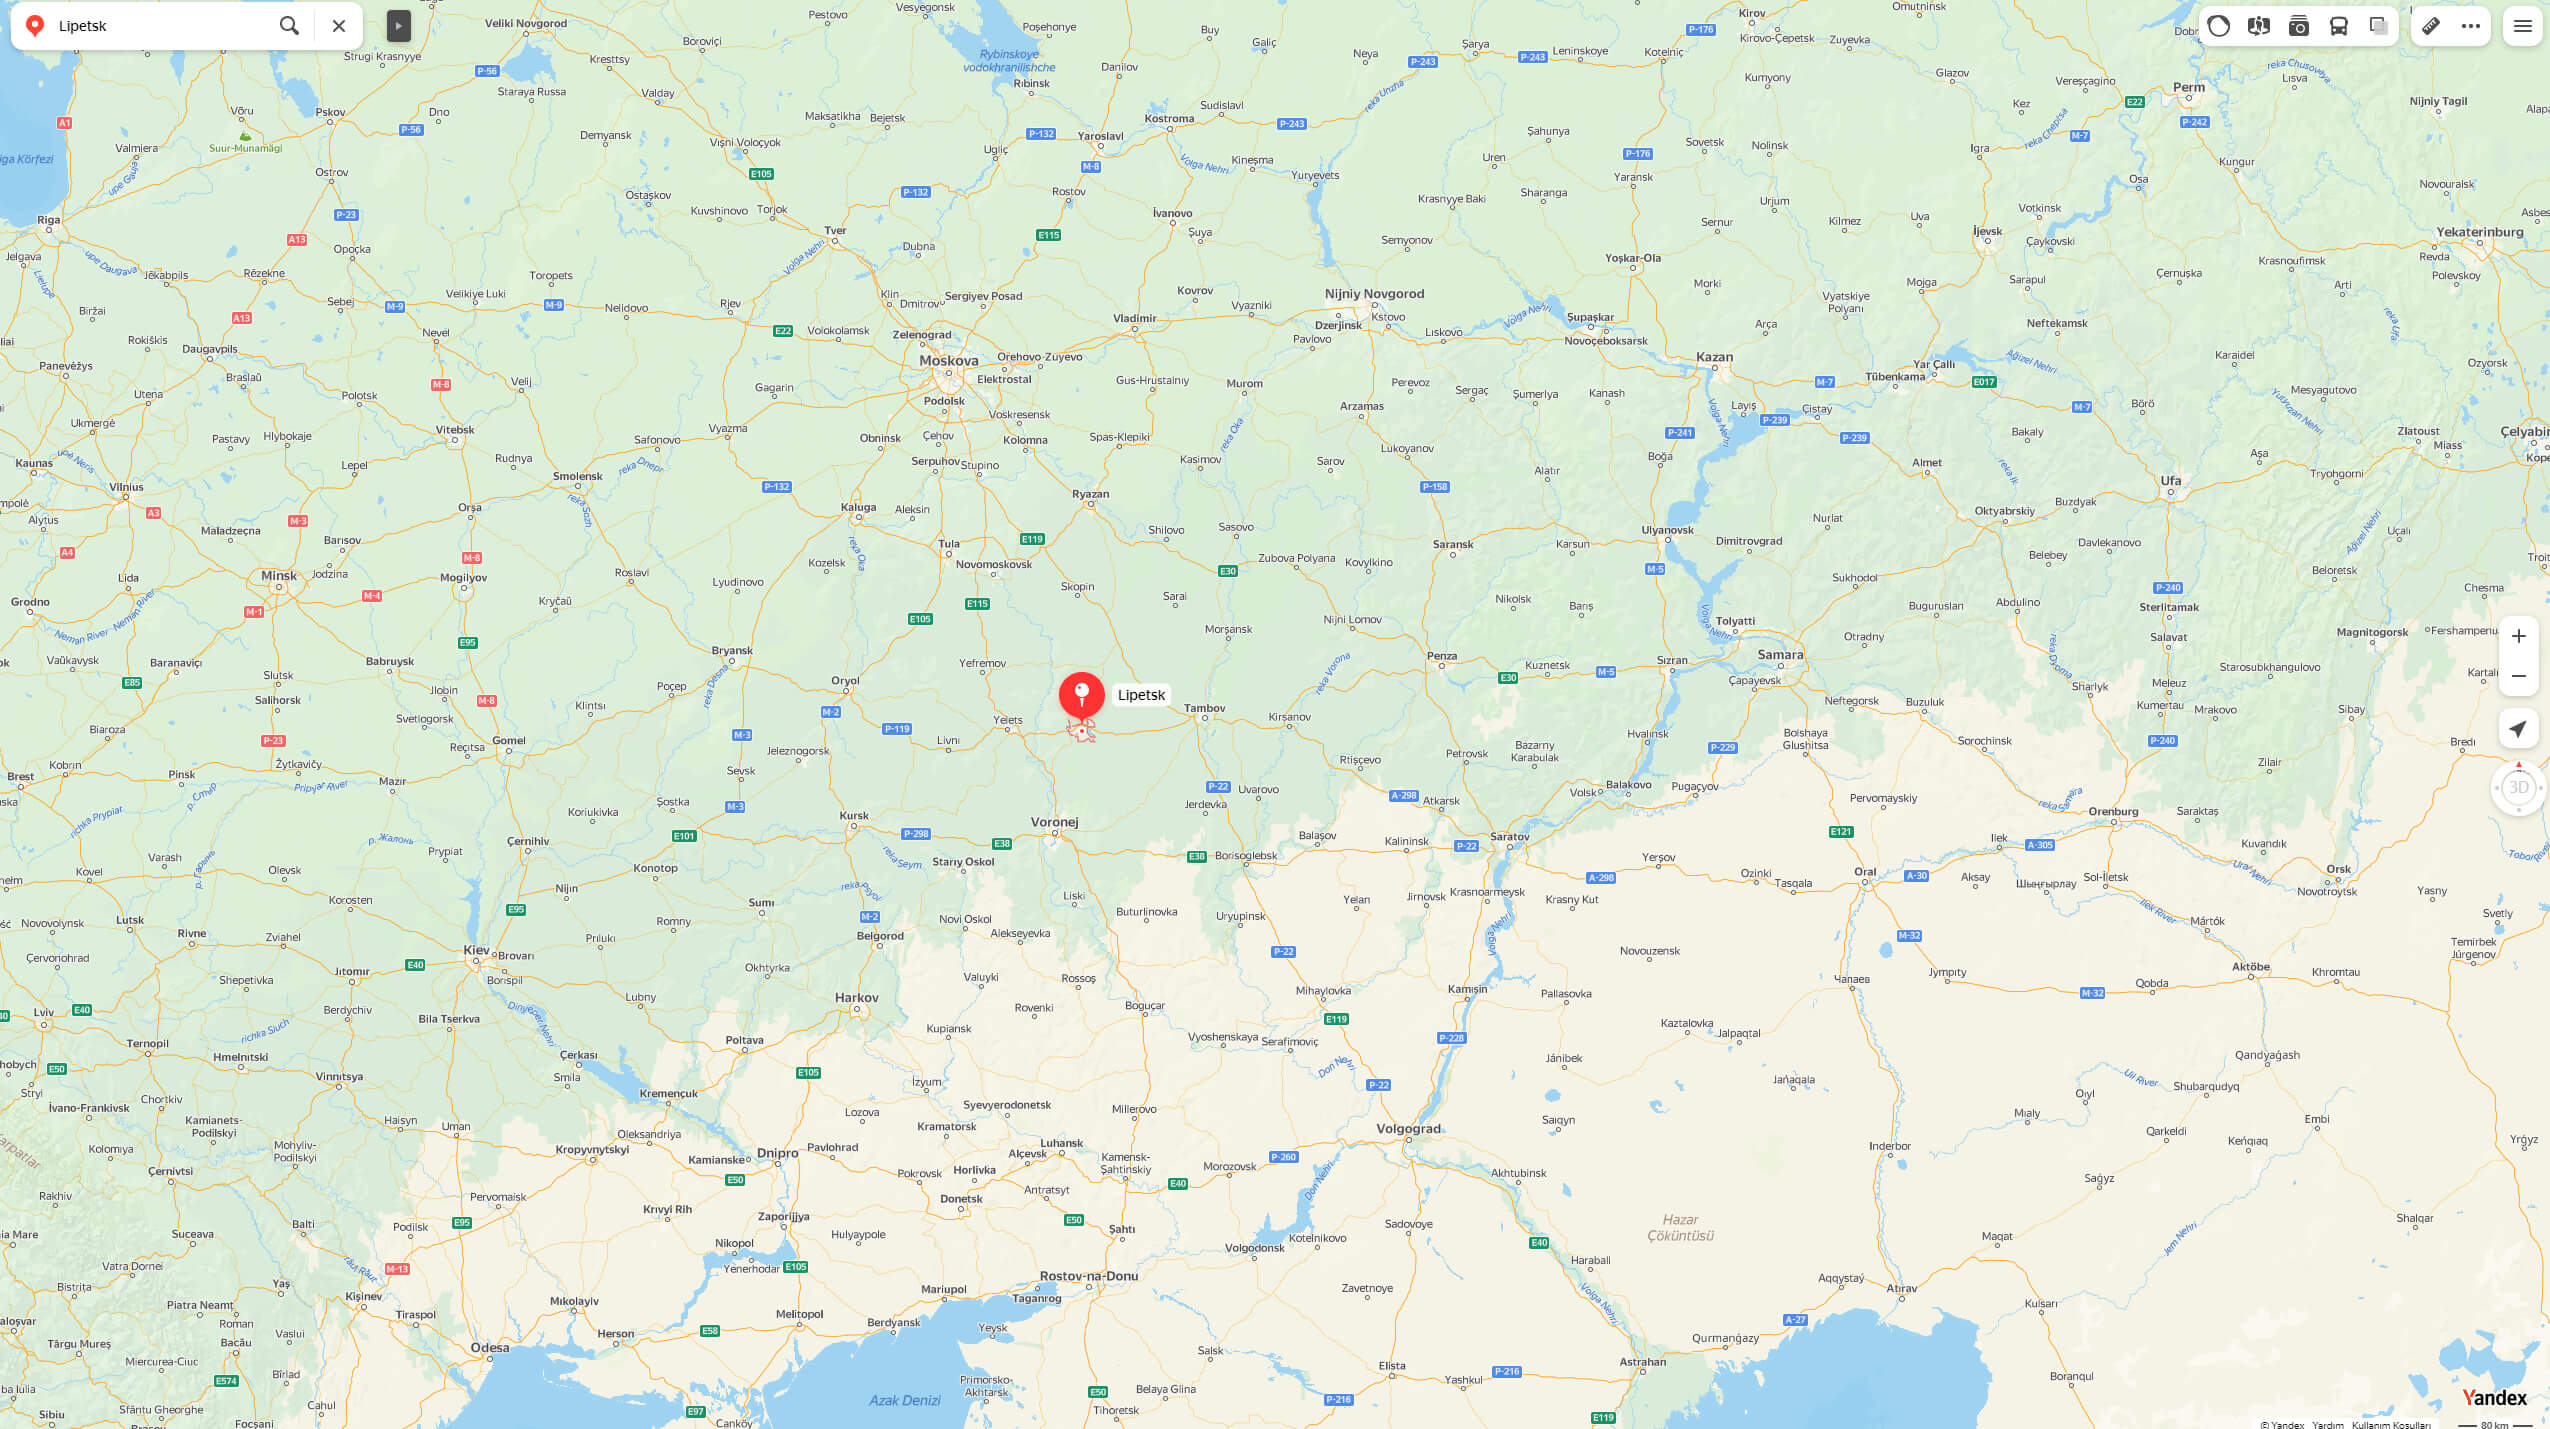 Where is located Lipetsk on Russia Map